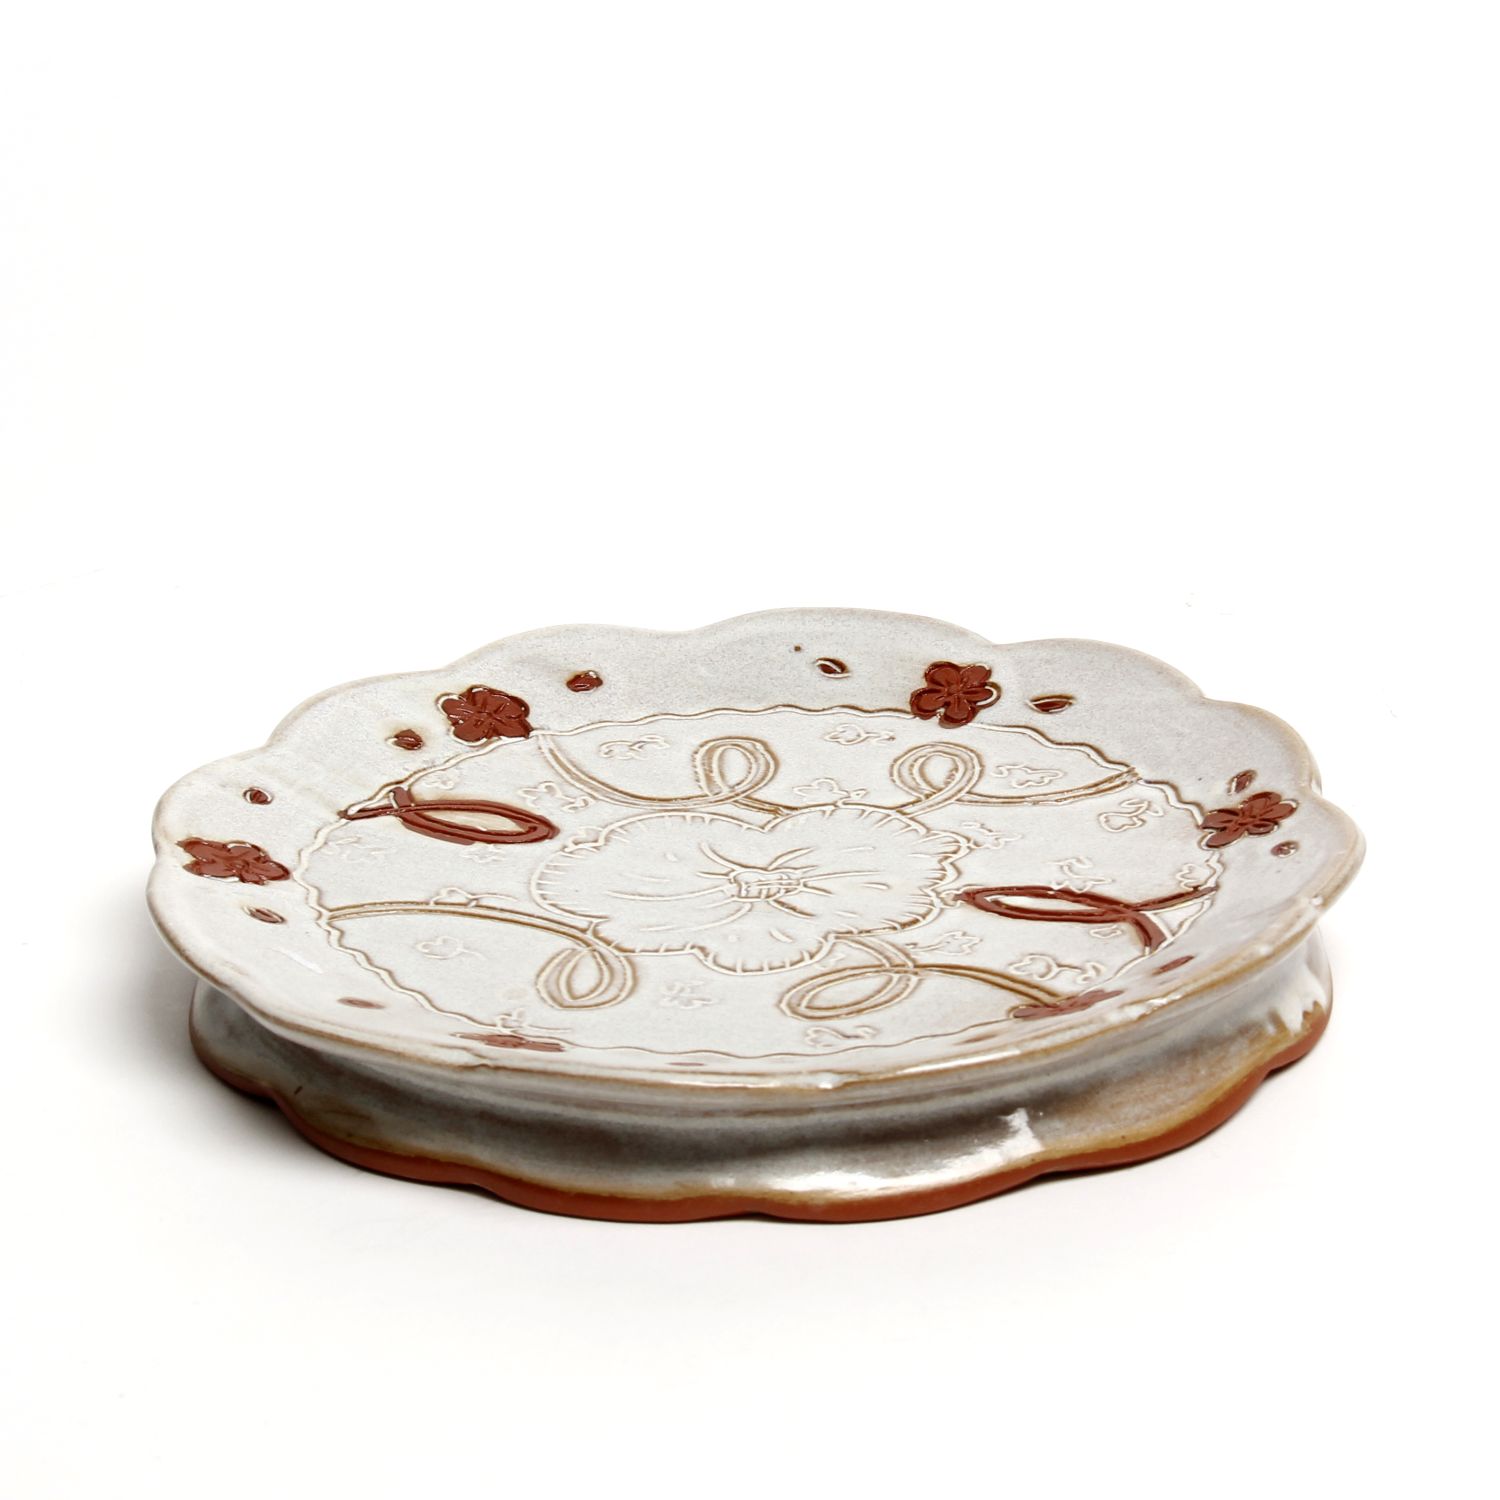 Zoe Pinnell: Small White Plate With Floral Centre Product Image 3 of 4